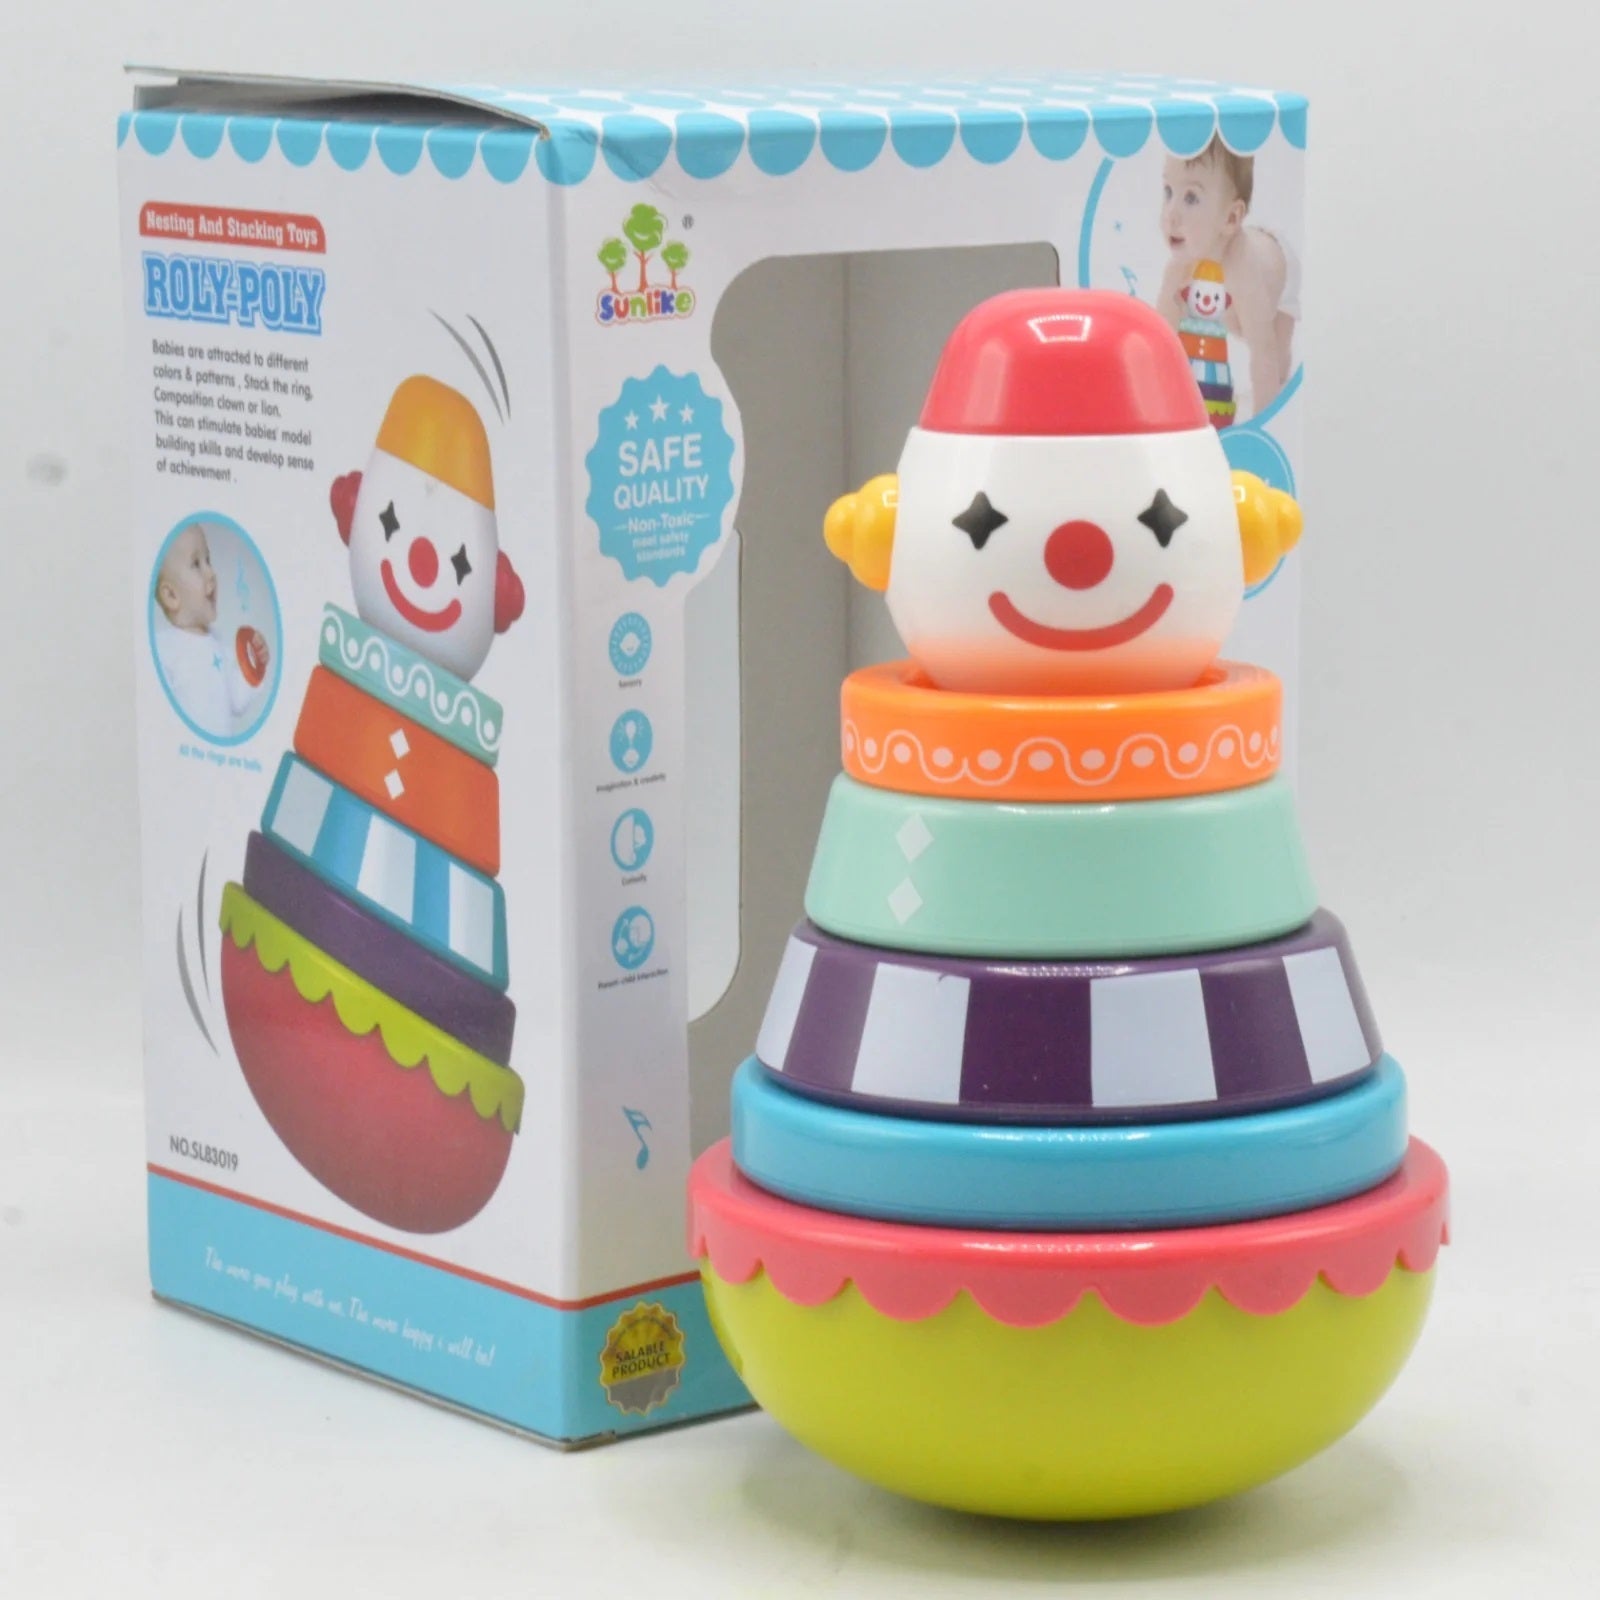 Nesting & Stacking Roly-Poly Toy